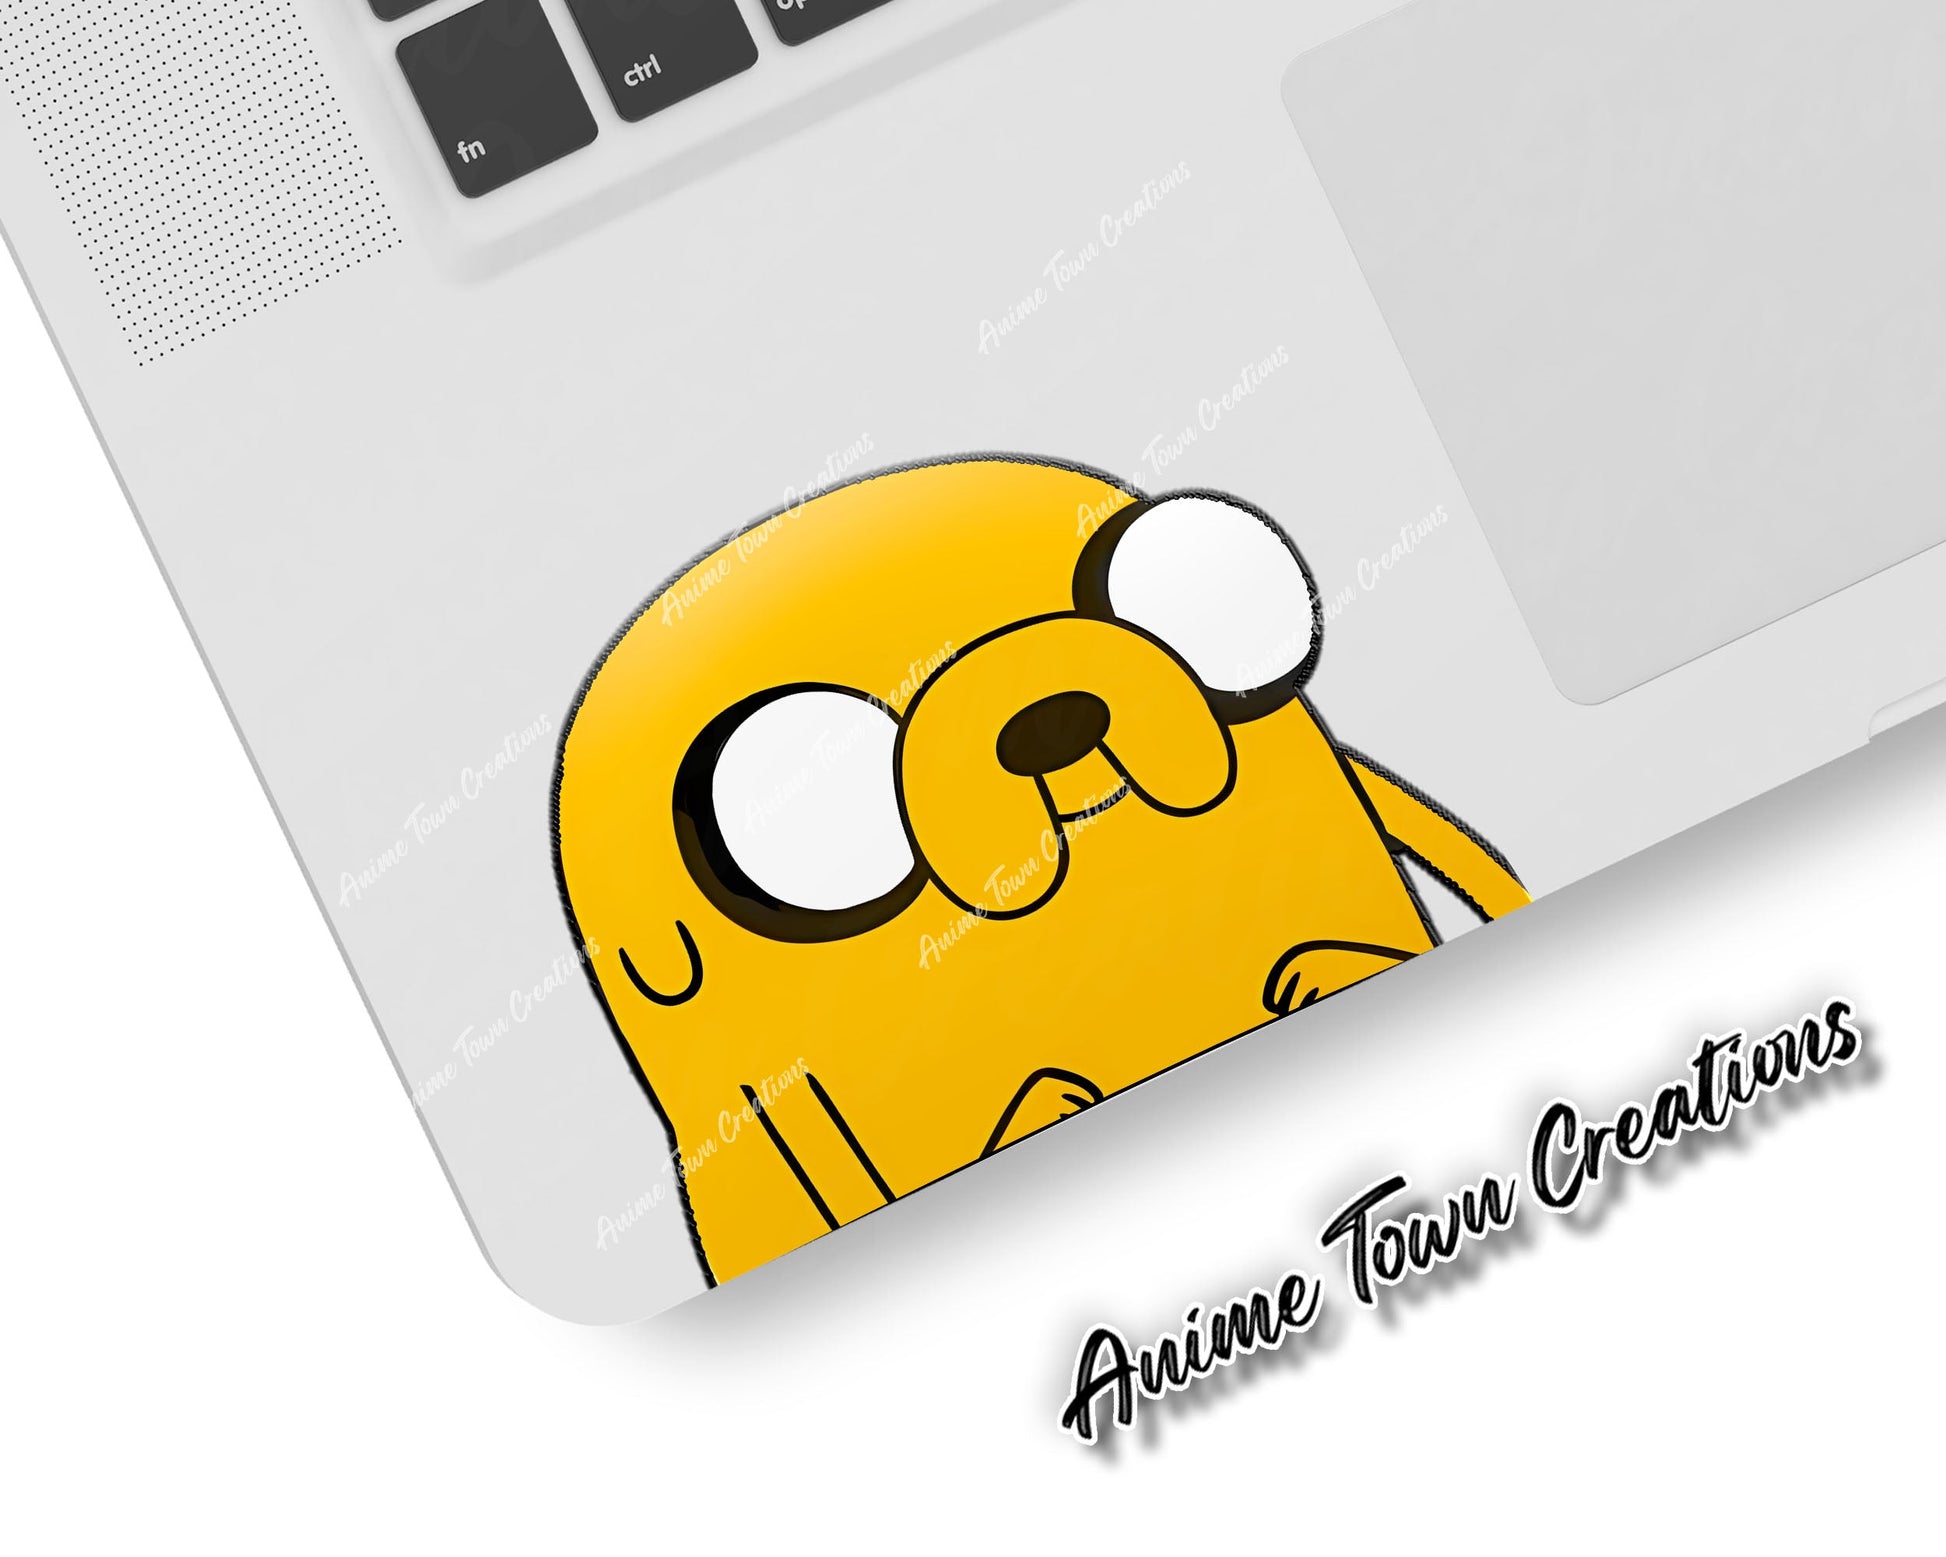 Anime Town Creations Sticker Adventure Time Jake 5" Accessories - Anime Adventure Time Sticker